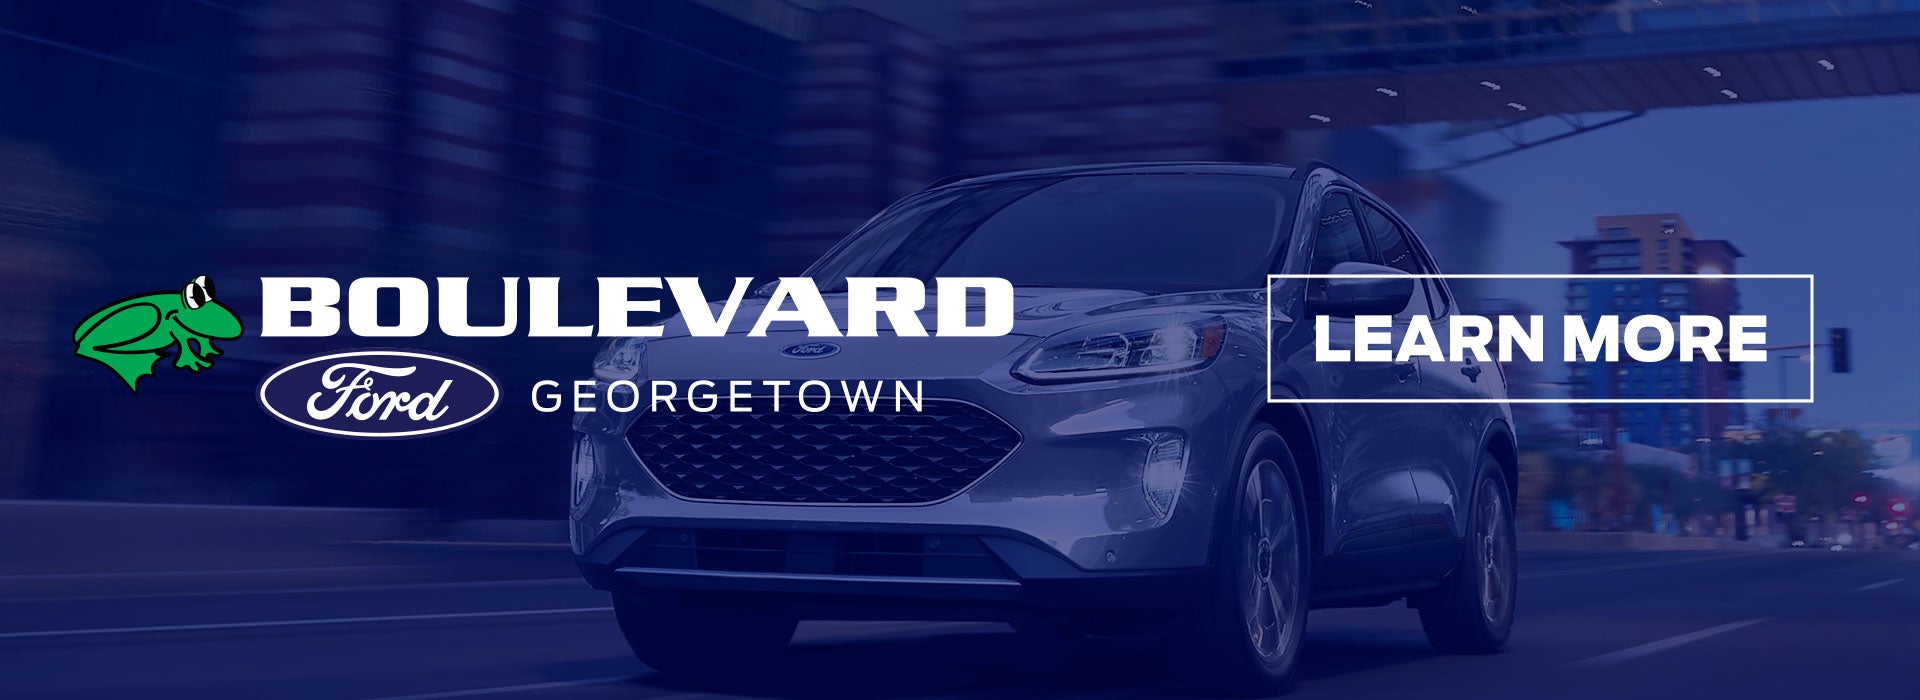 Boulevard Ford Lincoln of Georgetown